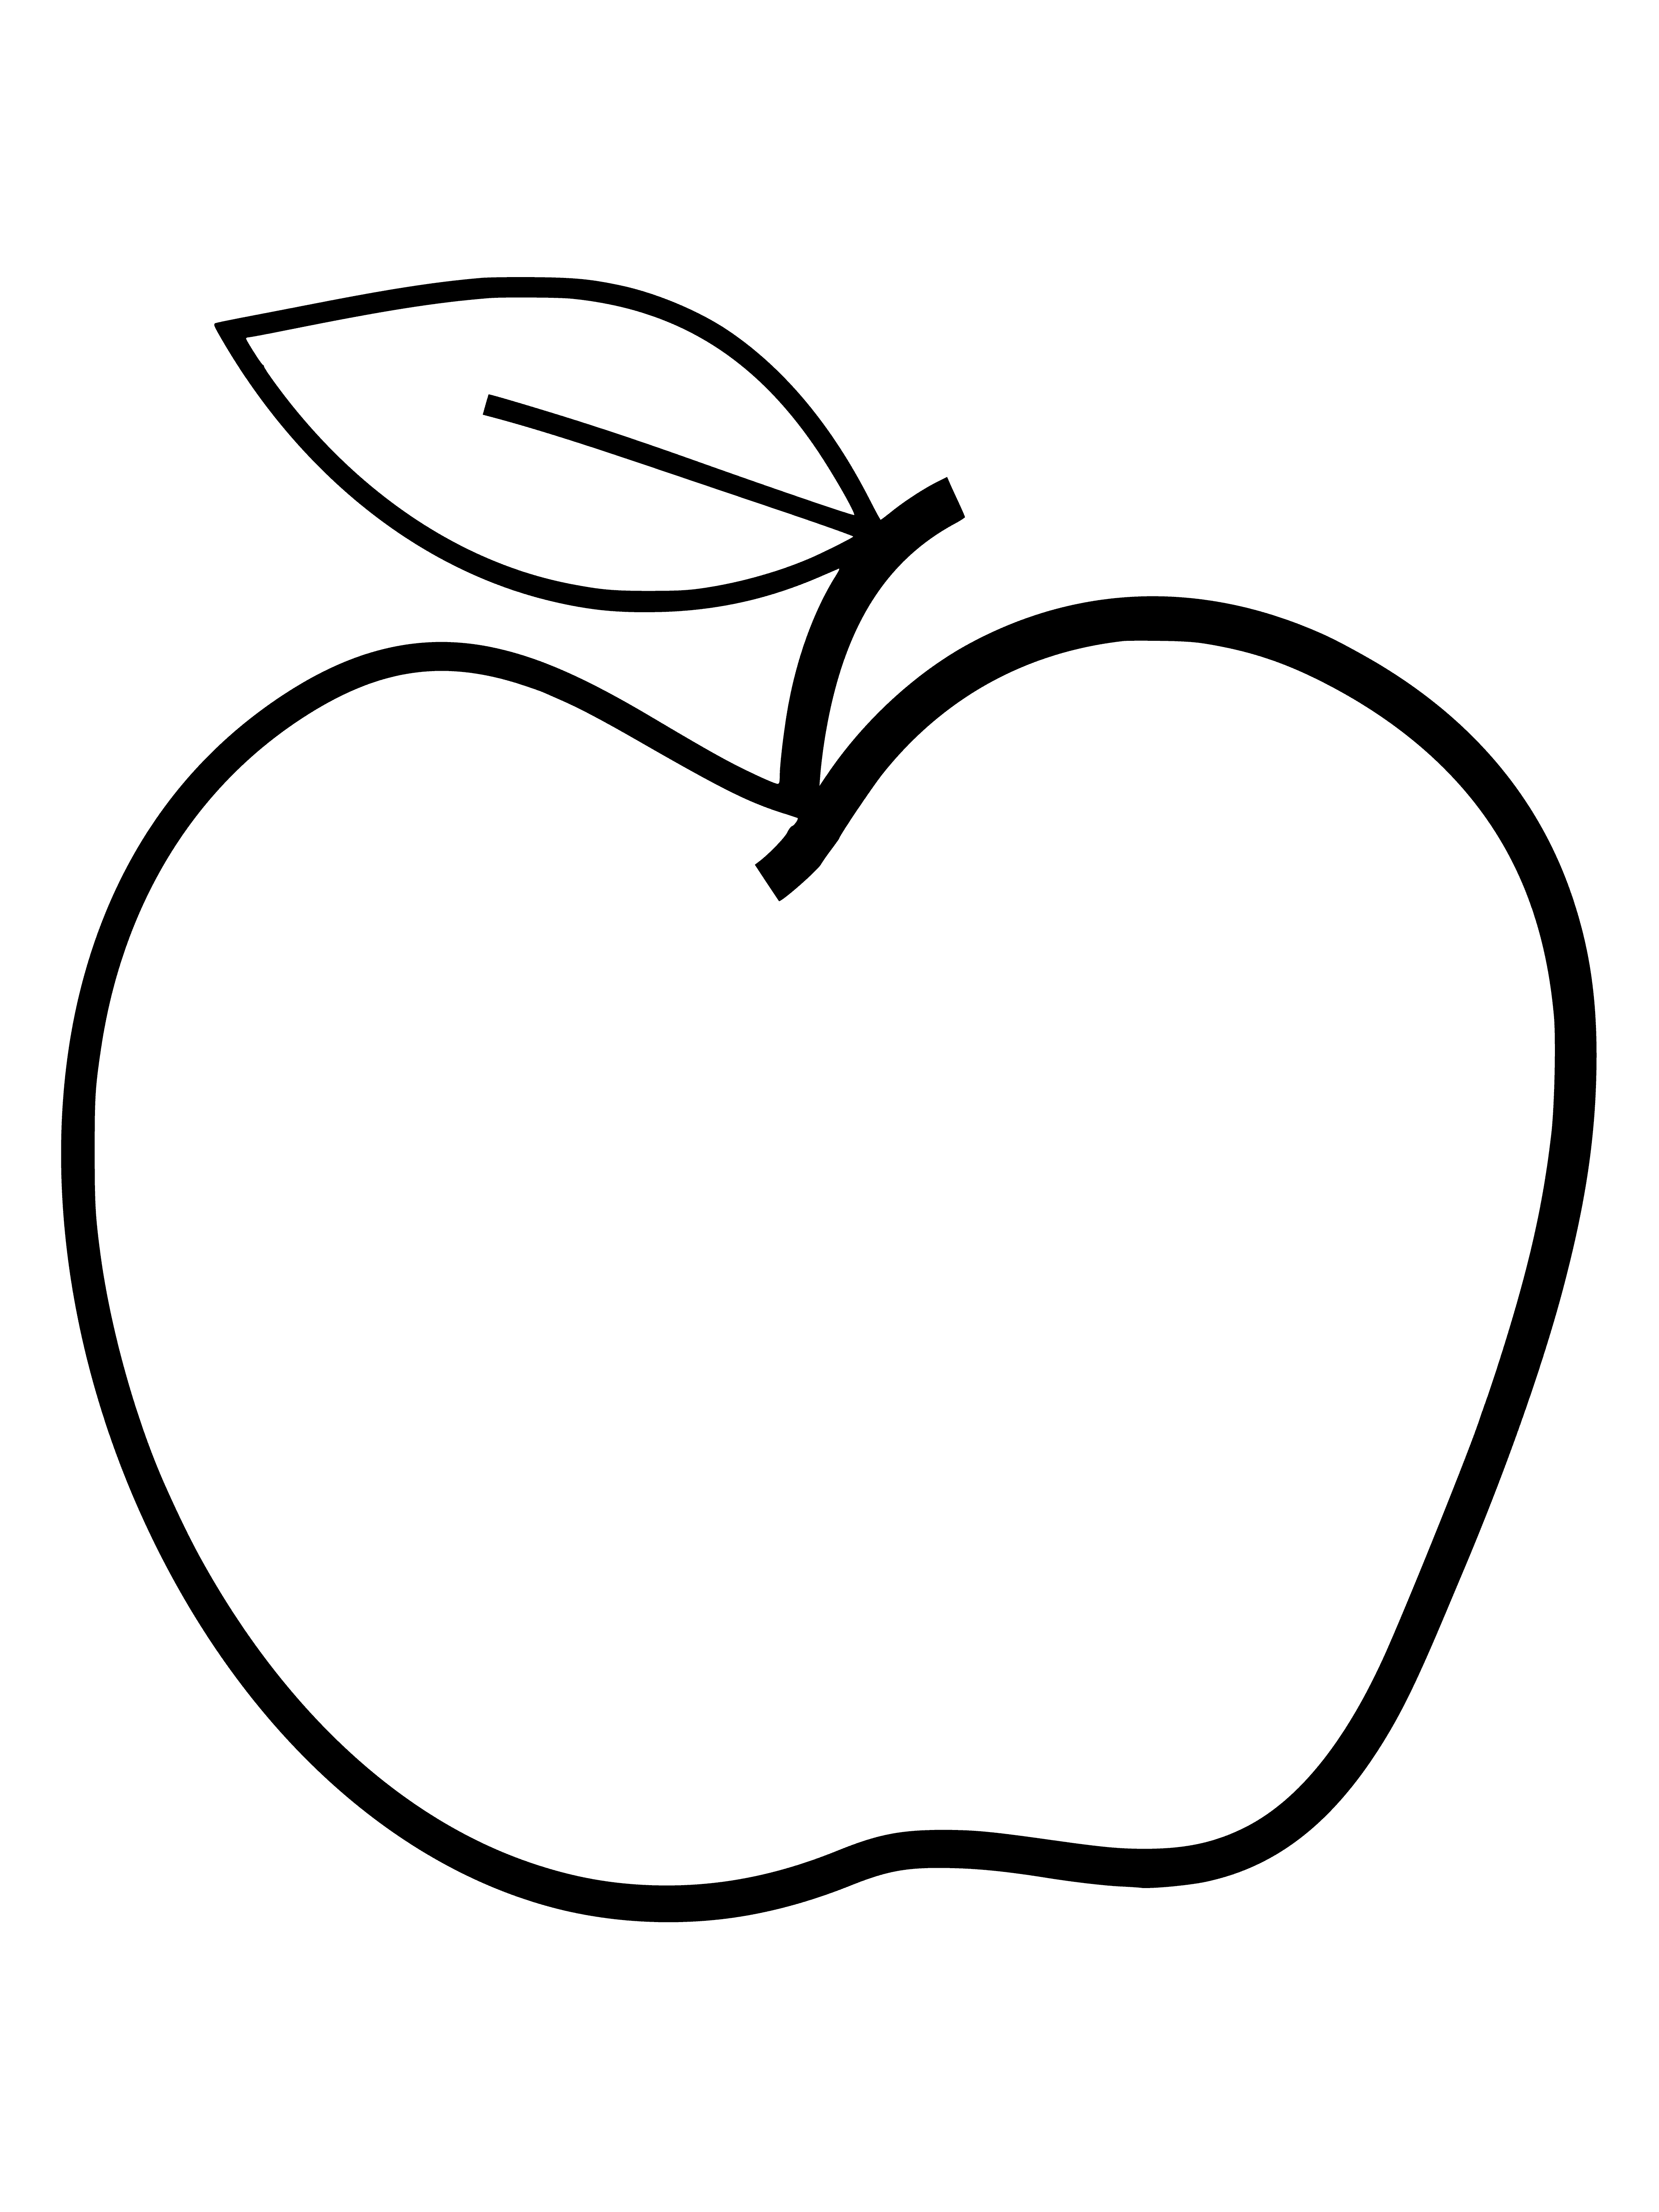 coloring page: An apple on a plate with a stem and leaves, red and green in color. #coloringpage